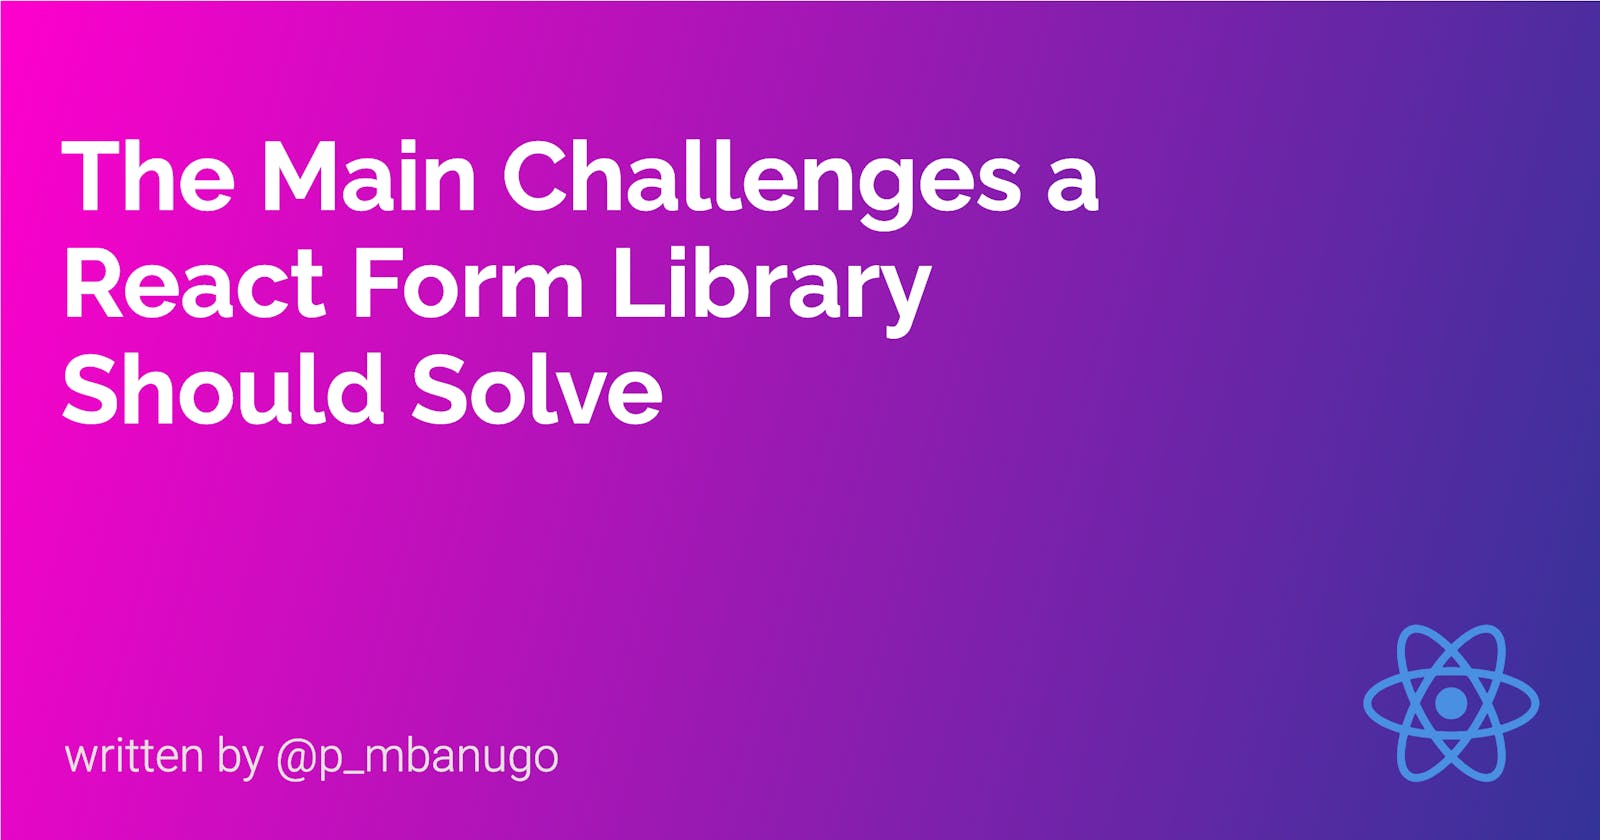 The Main Challenges a React Form Library Should Solve